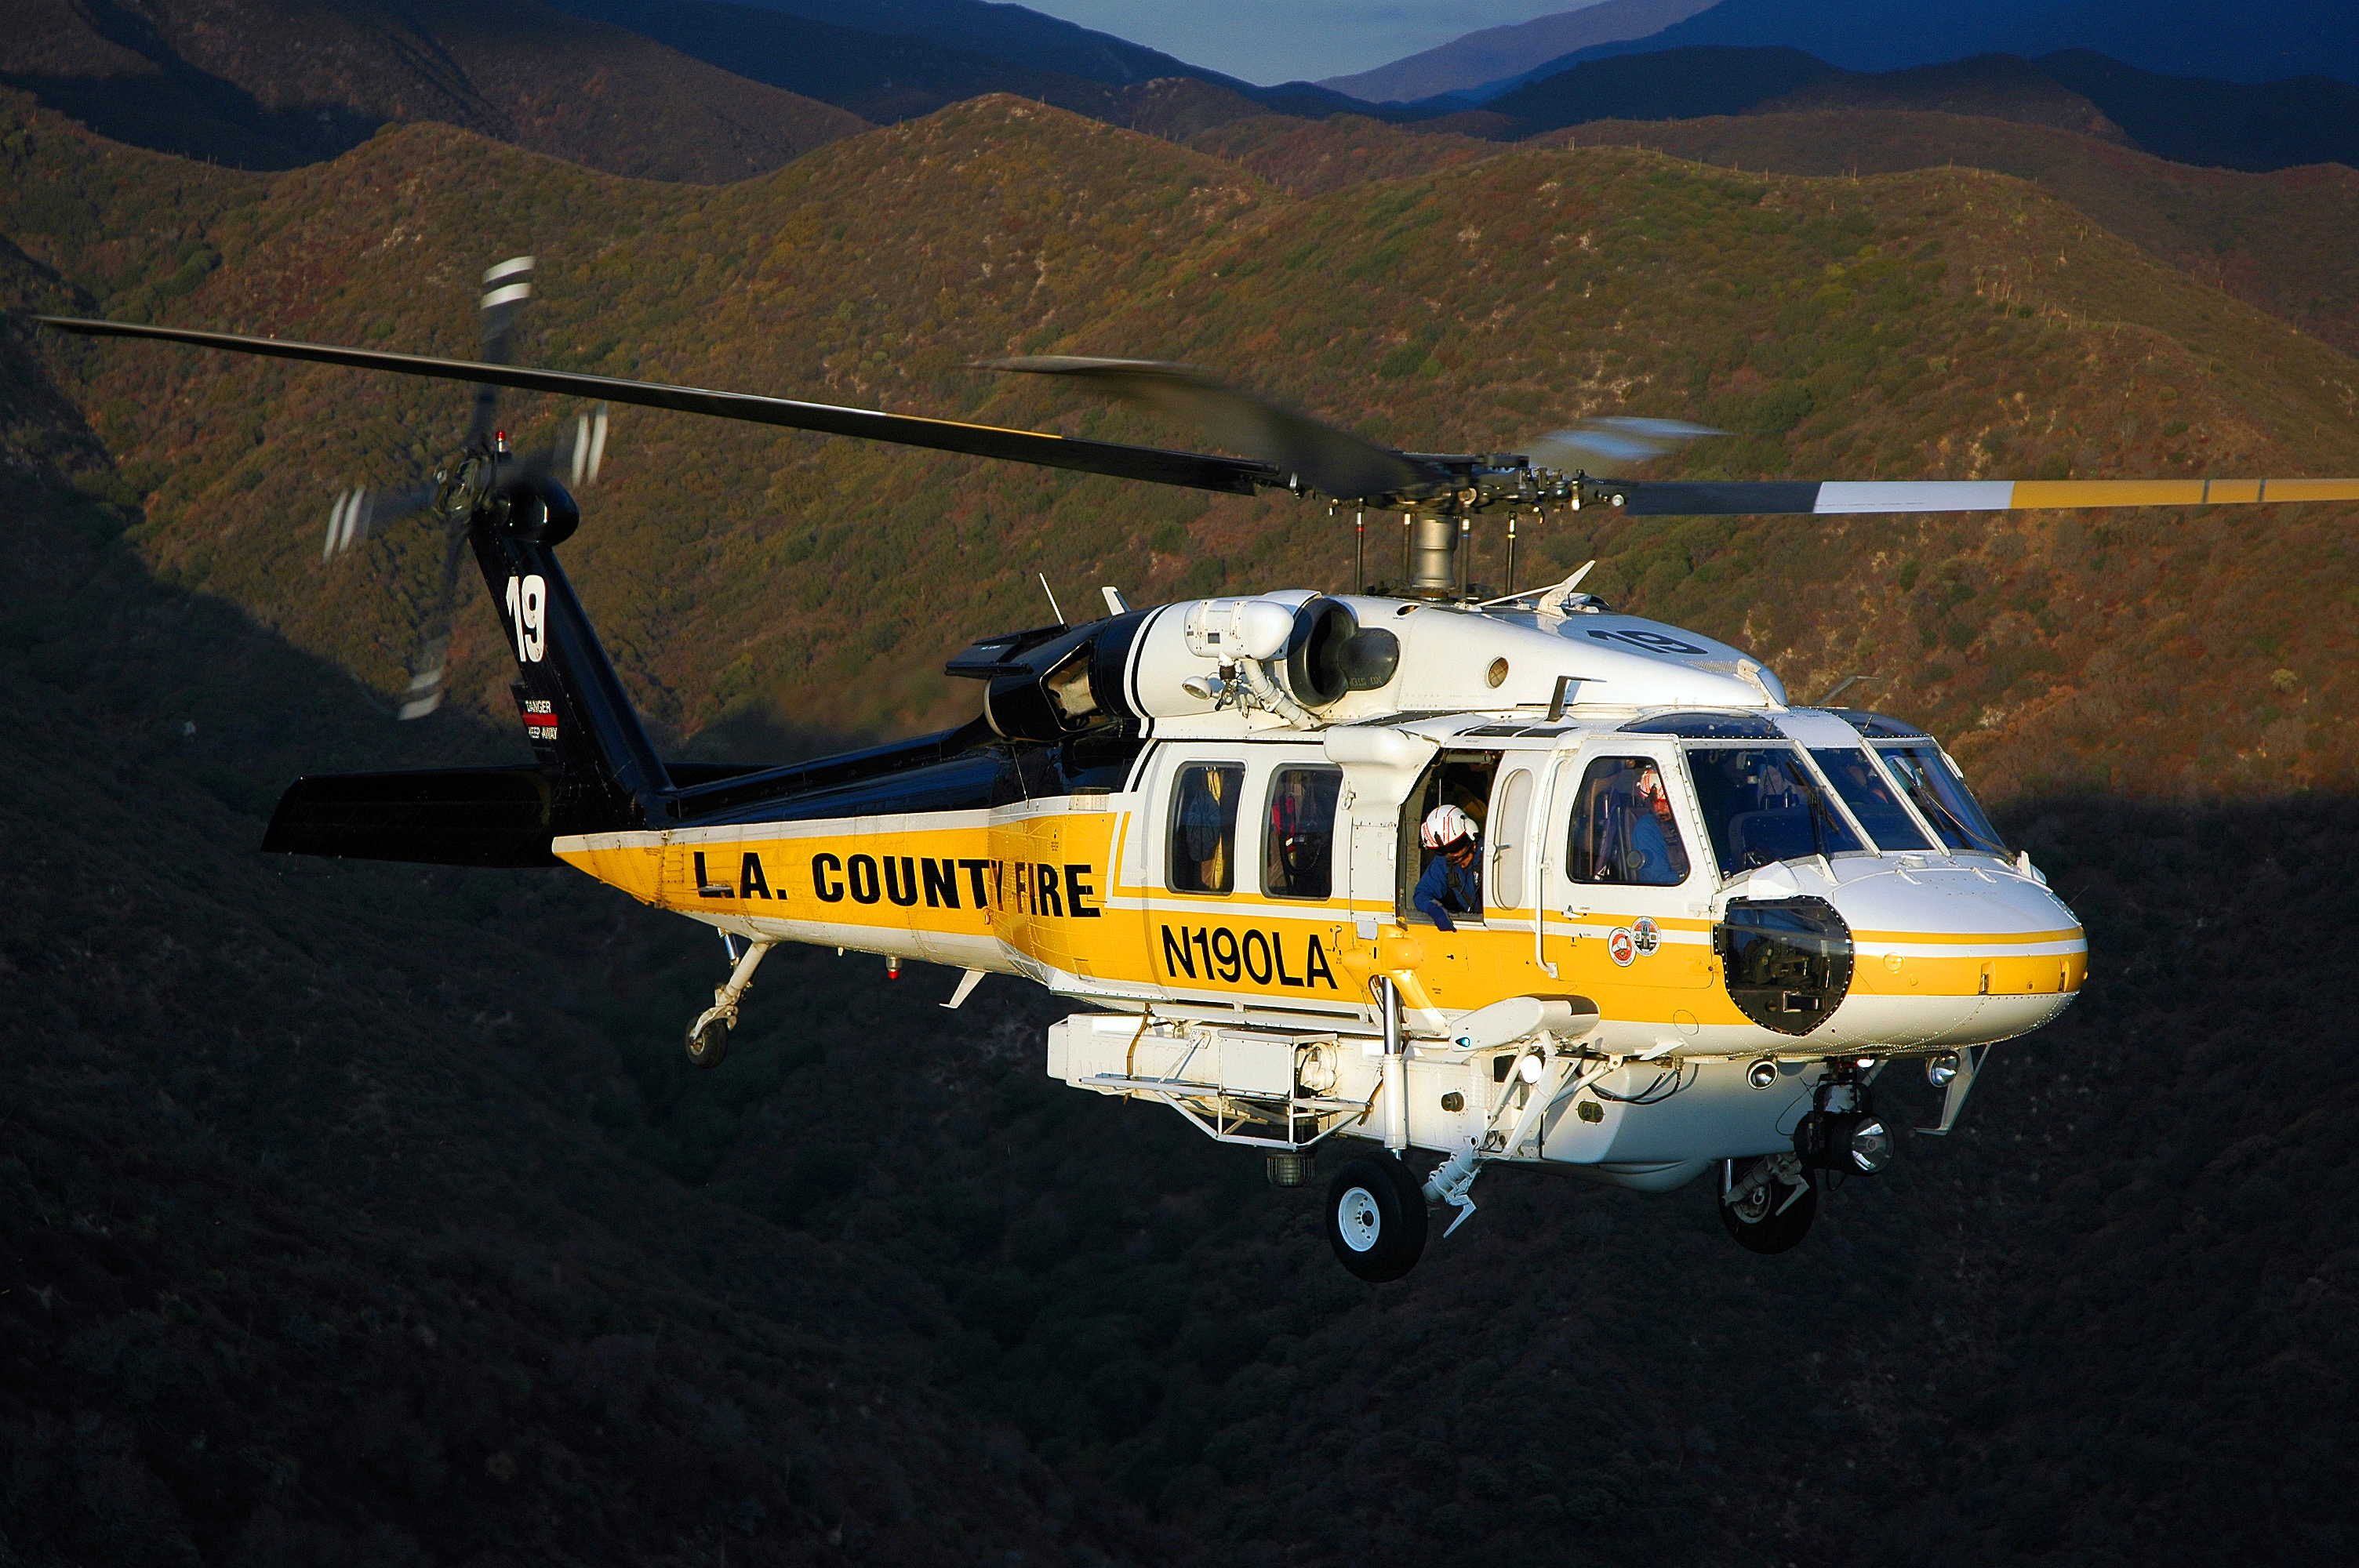 The L.A. County Fire Department has been recognized by Sikorsky for its SAR and maintenance efforts during the recent fire season. Skip Robinson Photo